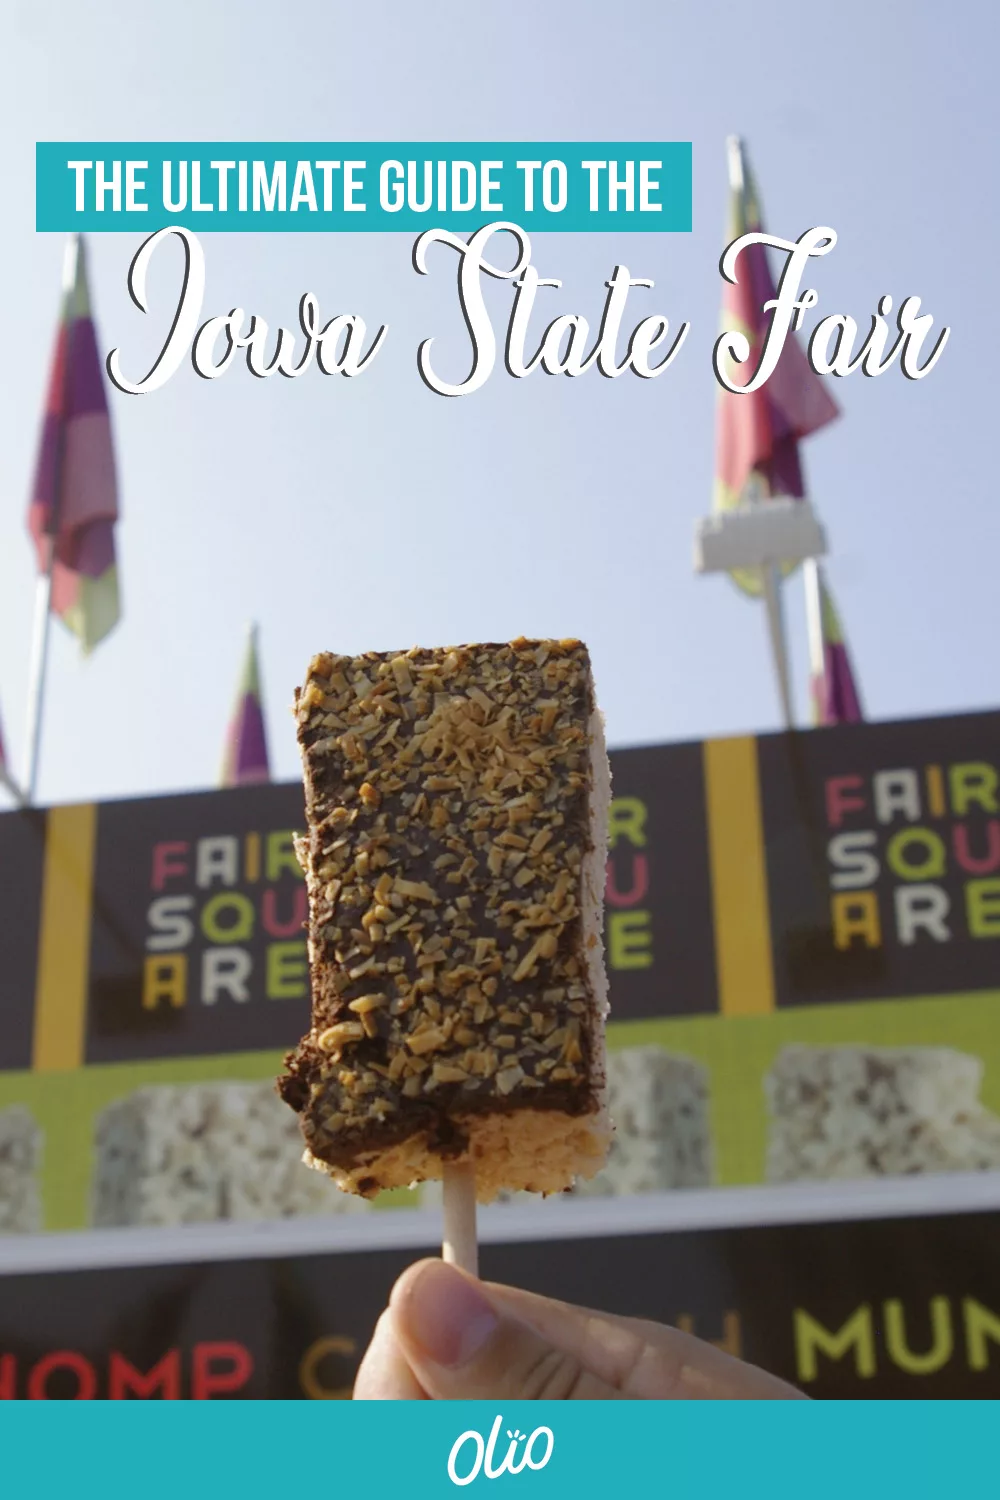 Nothing compares to the Iowa State Fair! With endless things to do and all sorts of food on a stick, this is an Iowa tradition you shouldn't miss. Experience the butter cow, ride the sky glider, and so much more during this annual event. Discover everything you need to know before your visit with this handy guide to the Iowa State Fair!